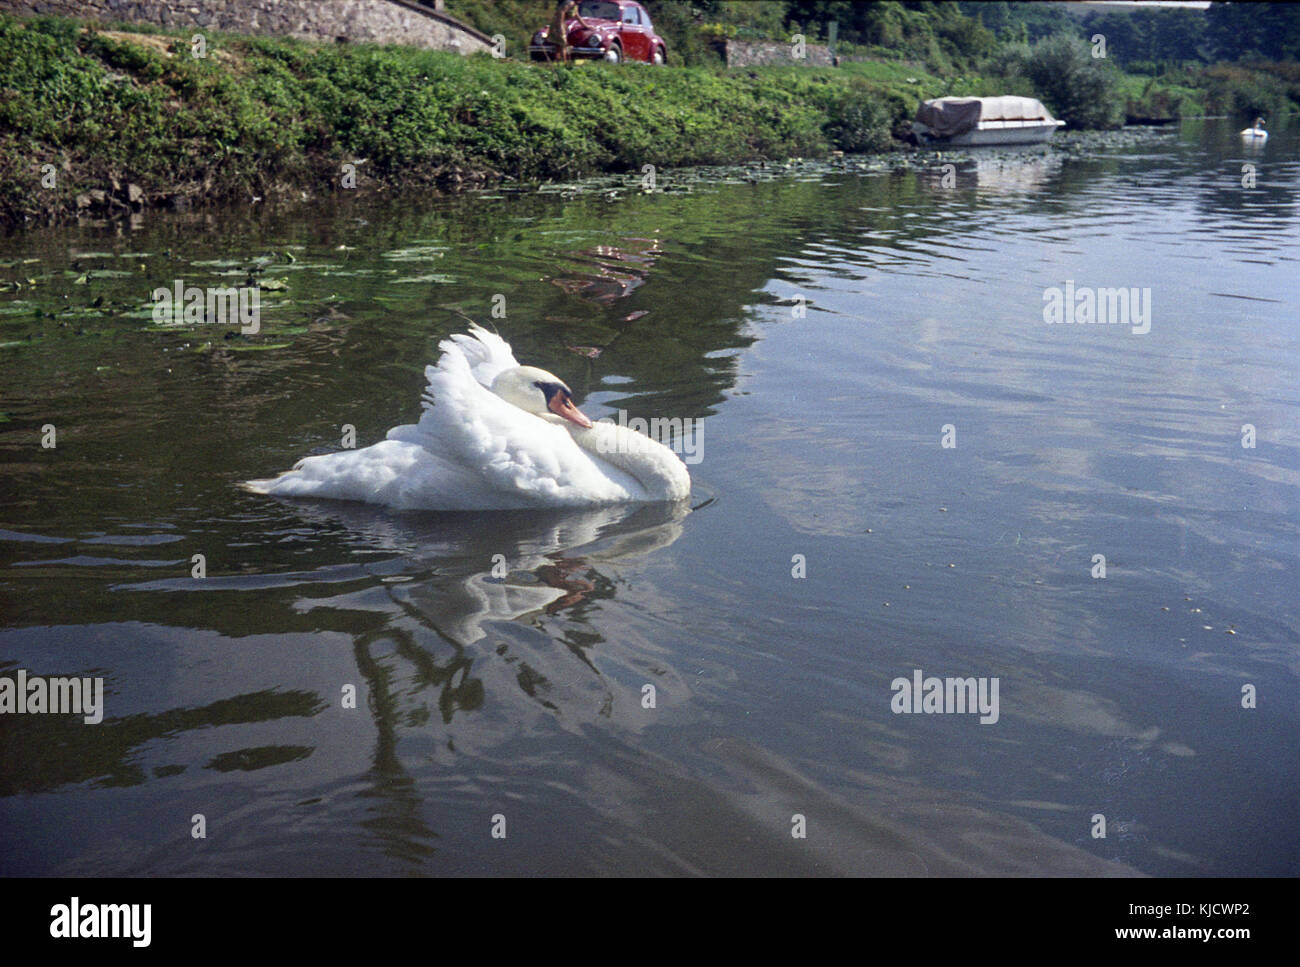 auf photography hi-res see images - stock and Schwan Alamy